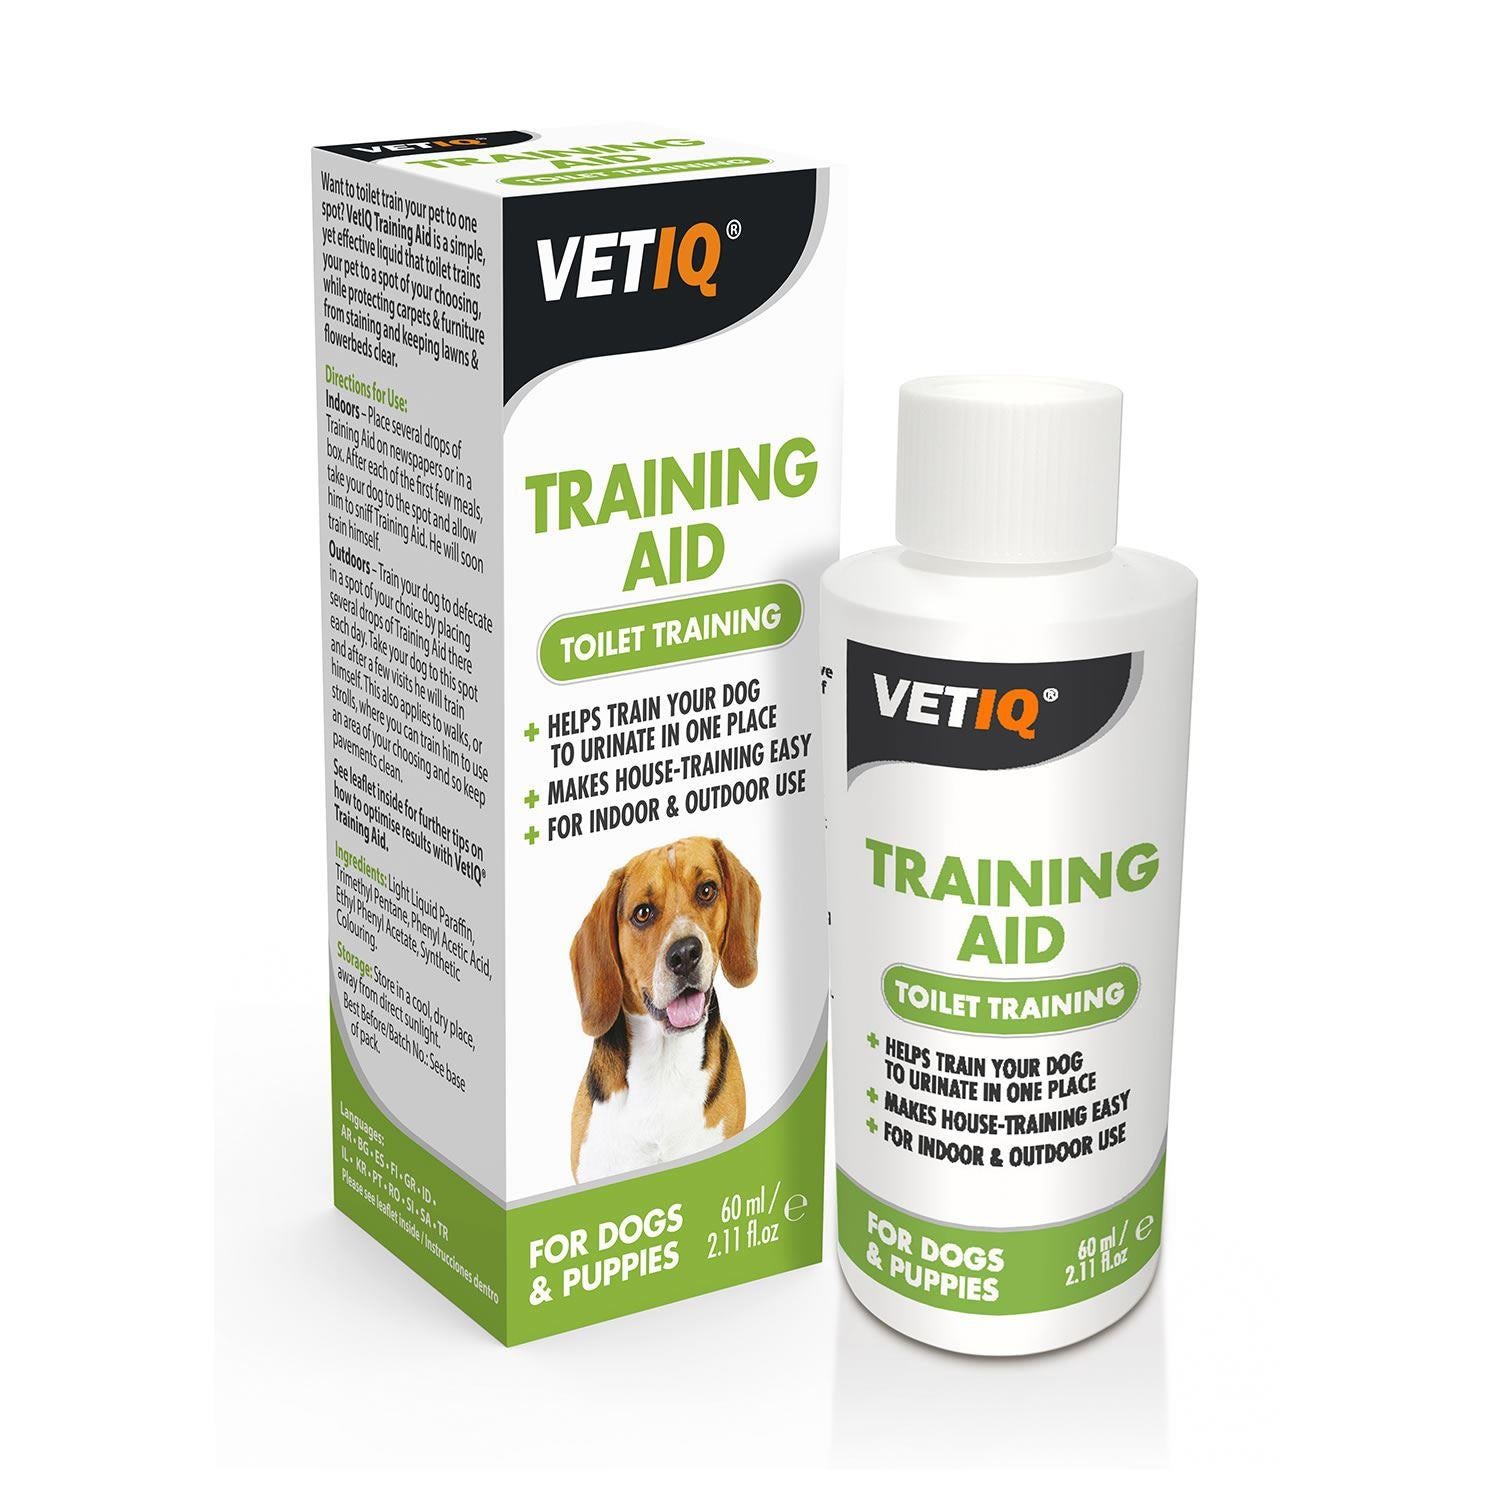 Vetiq Toilet Training Aid For Dogs & Puppies - Just Horse Riders